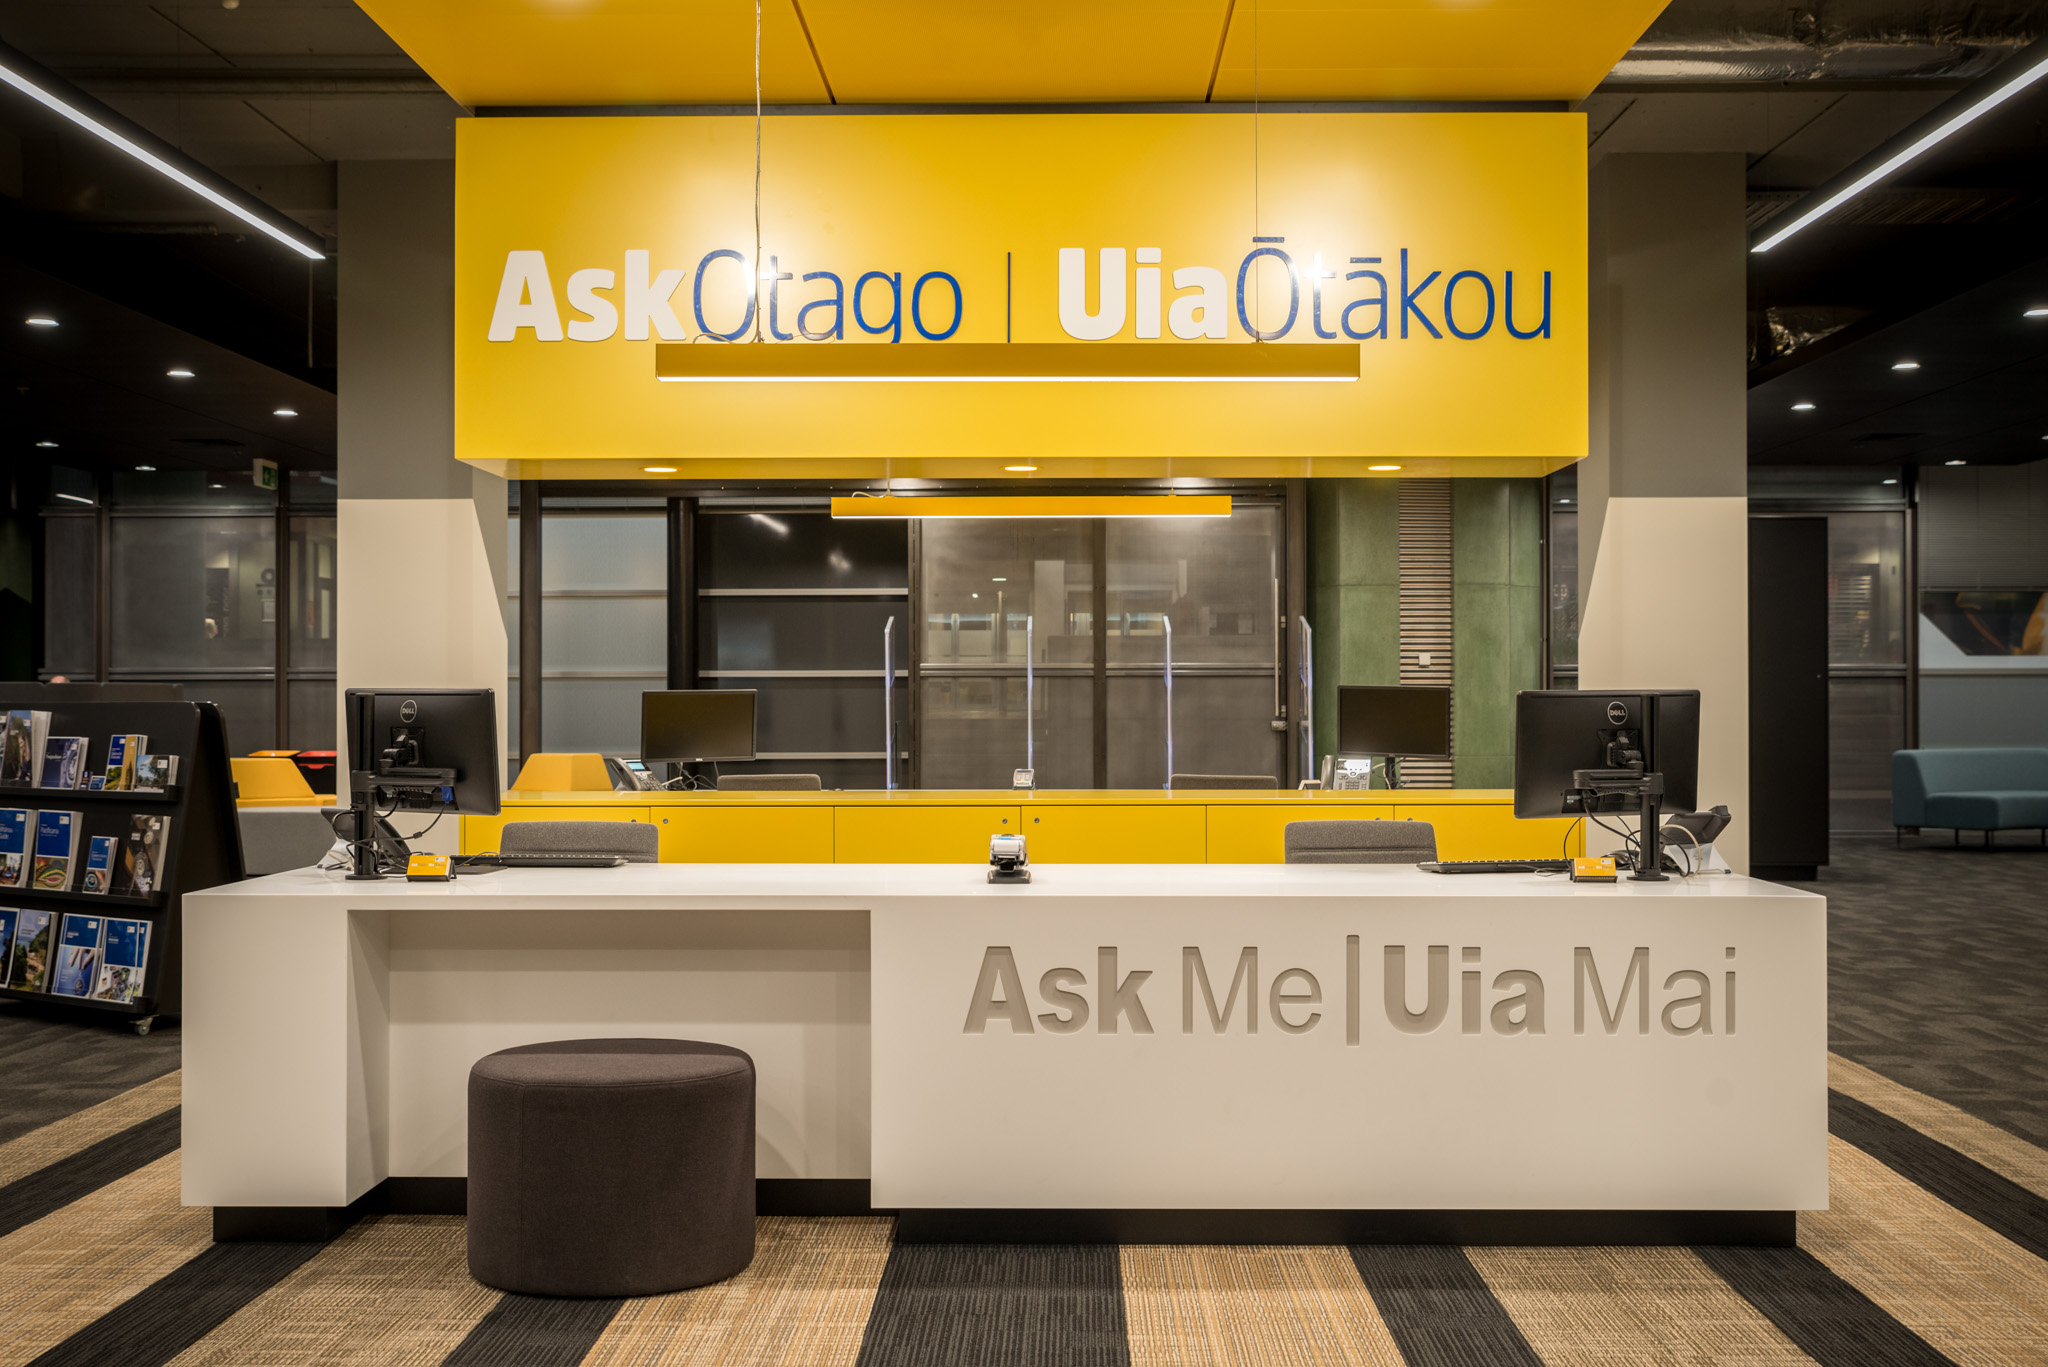 Ask Otago spatial design and layout